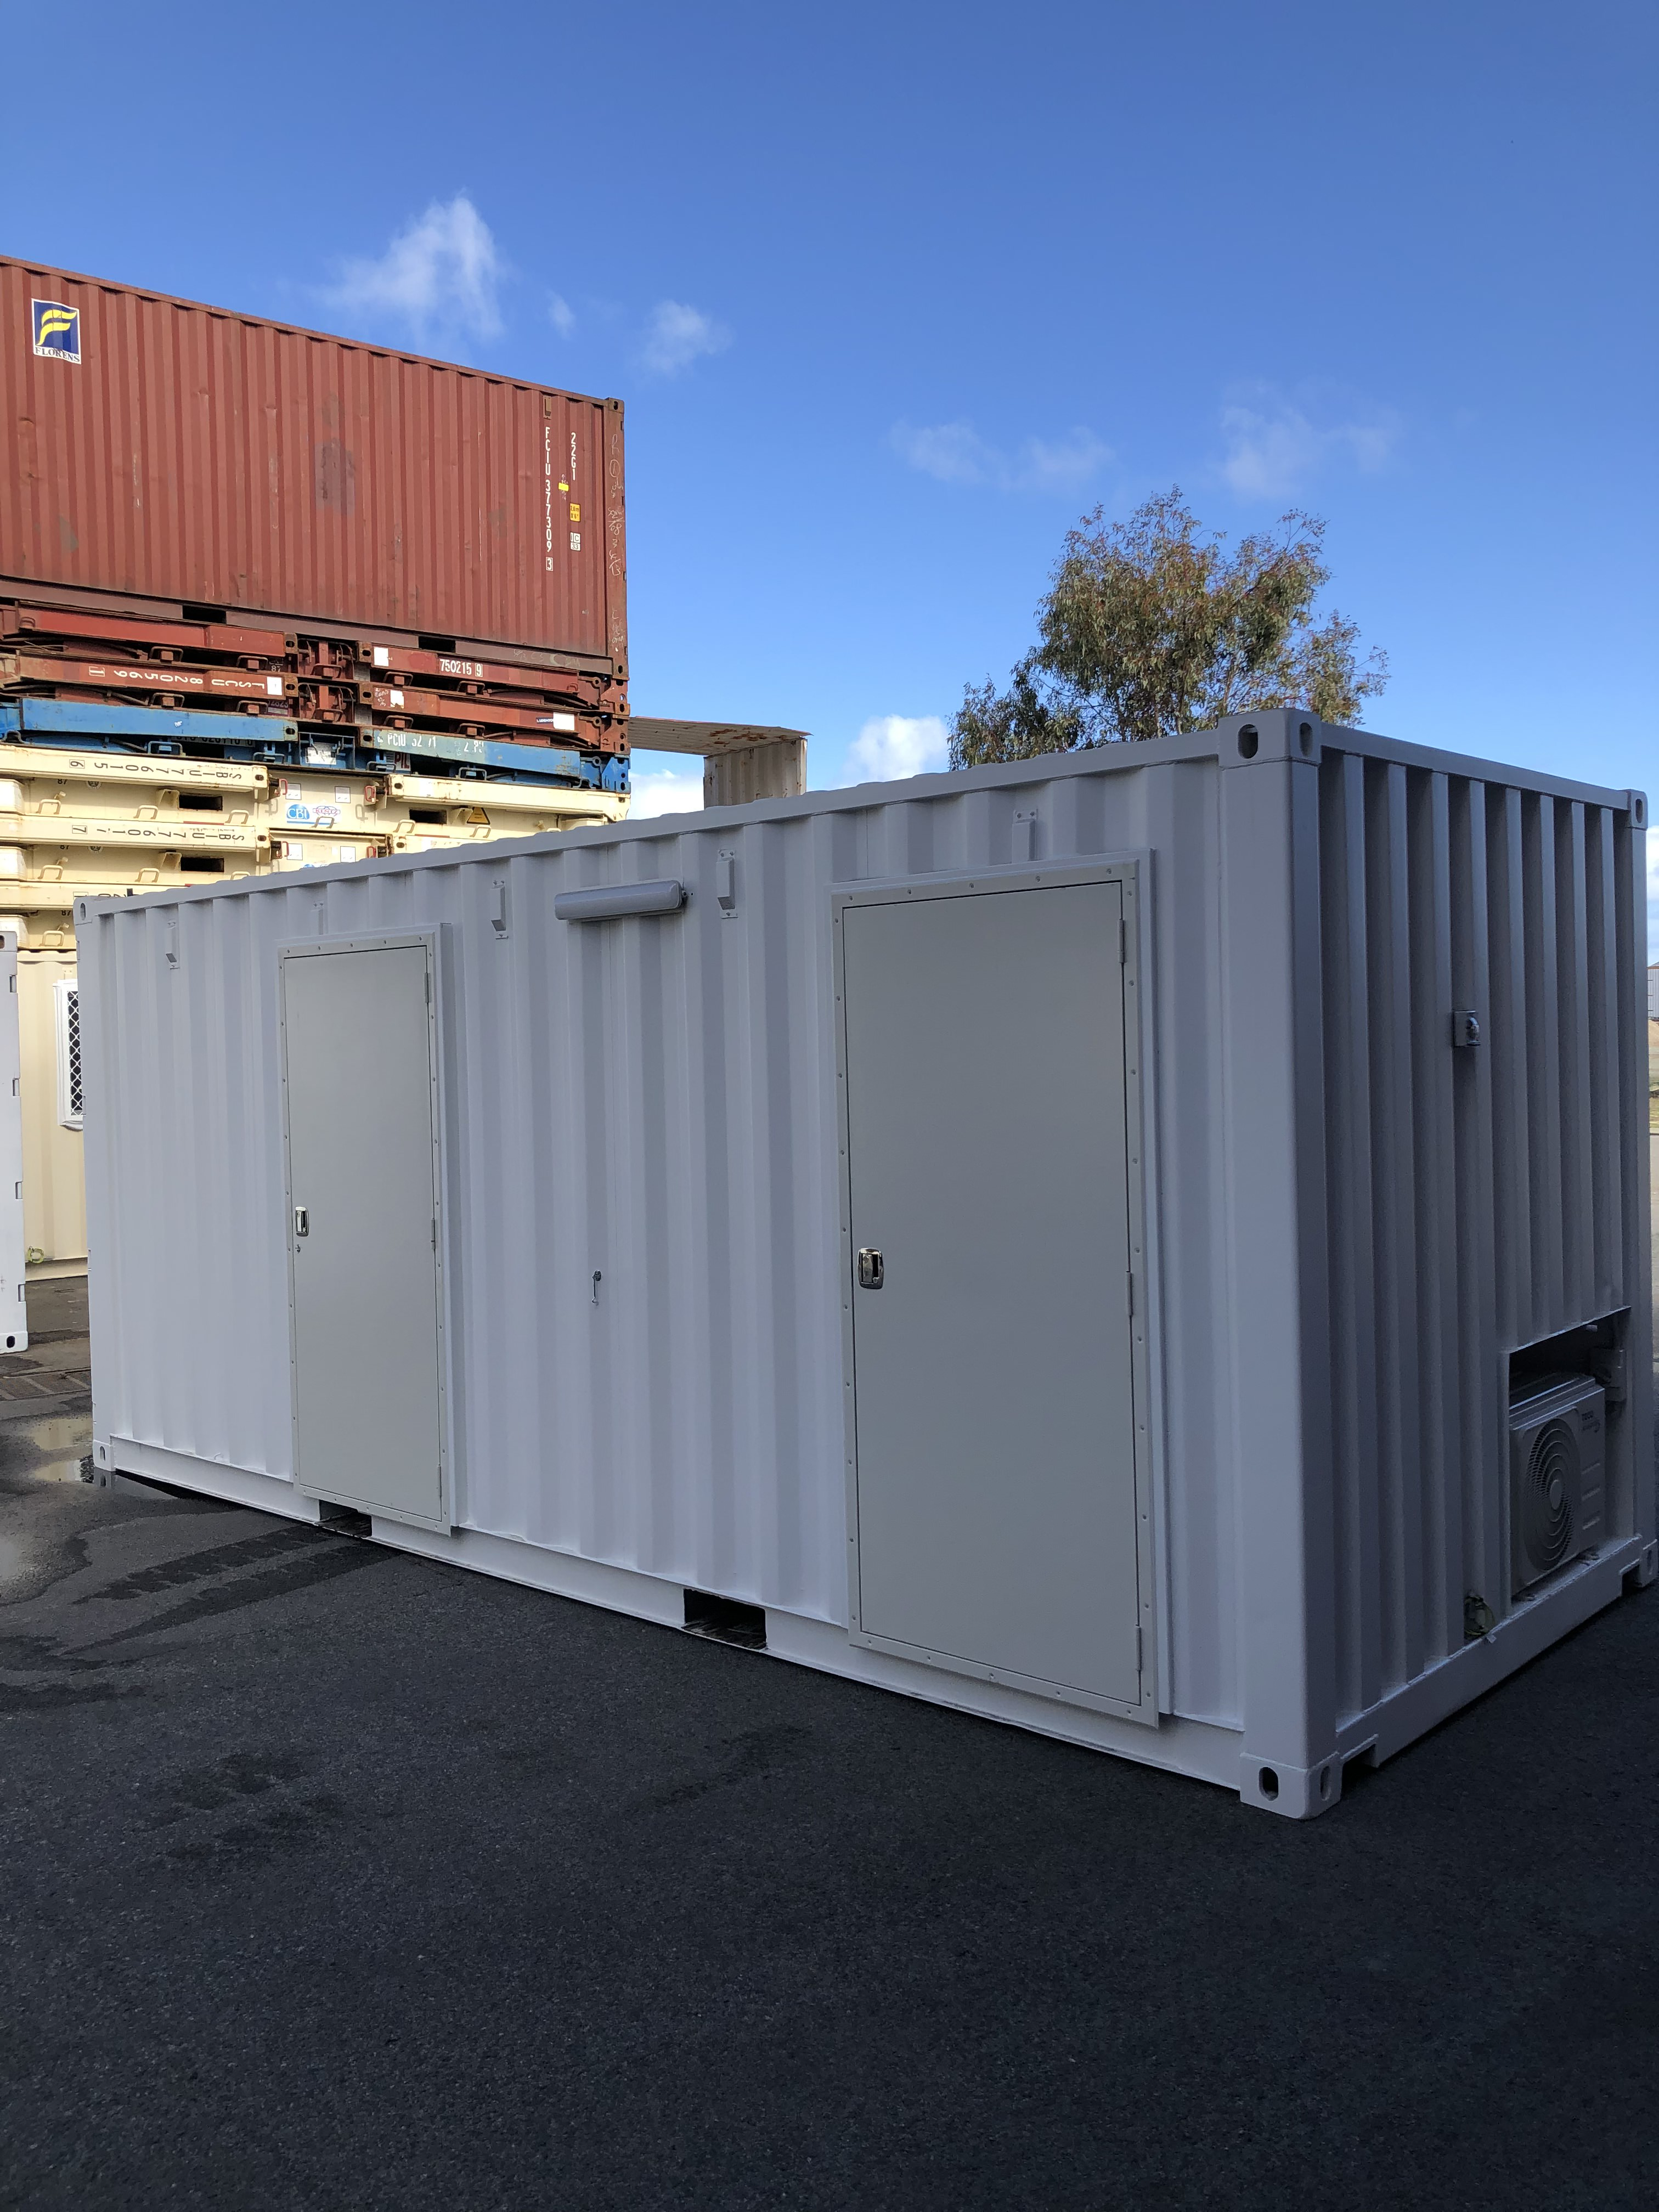 Small Shipping Containers  ABC Shipping Containers Perth